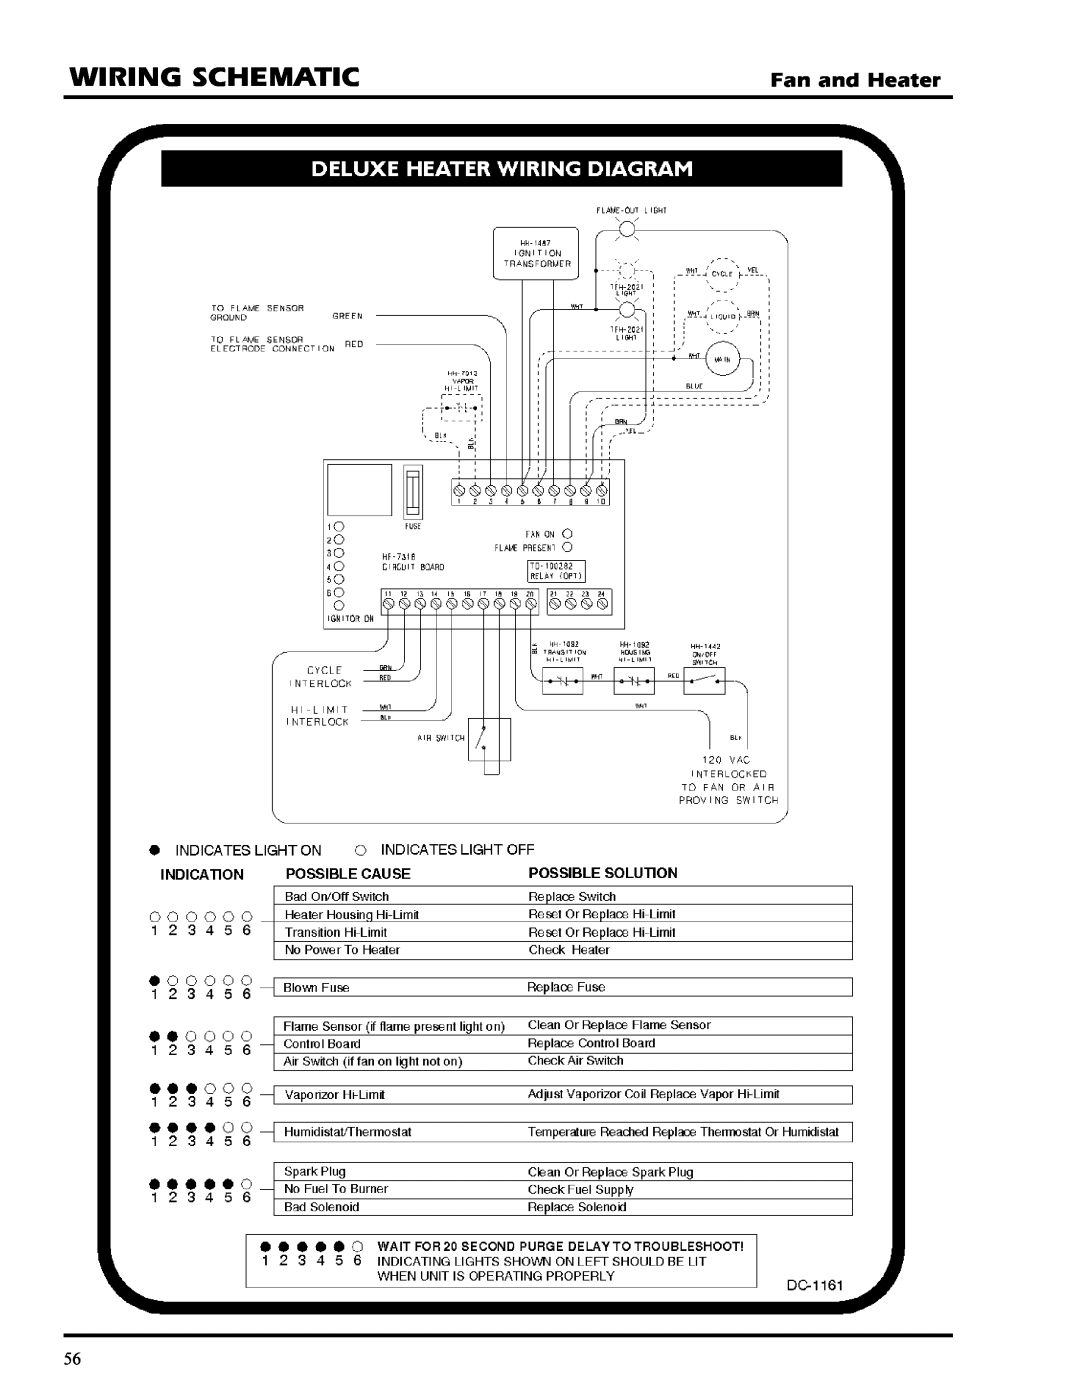 GSI Outdoors PNEG-377 service manual Wiring Schematic, Fan and Heater 